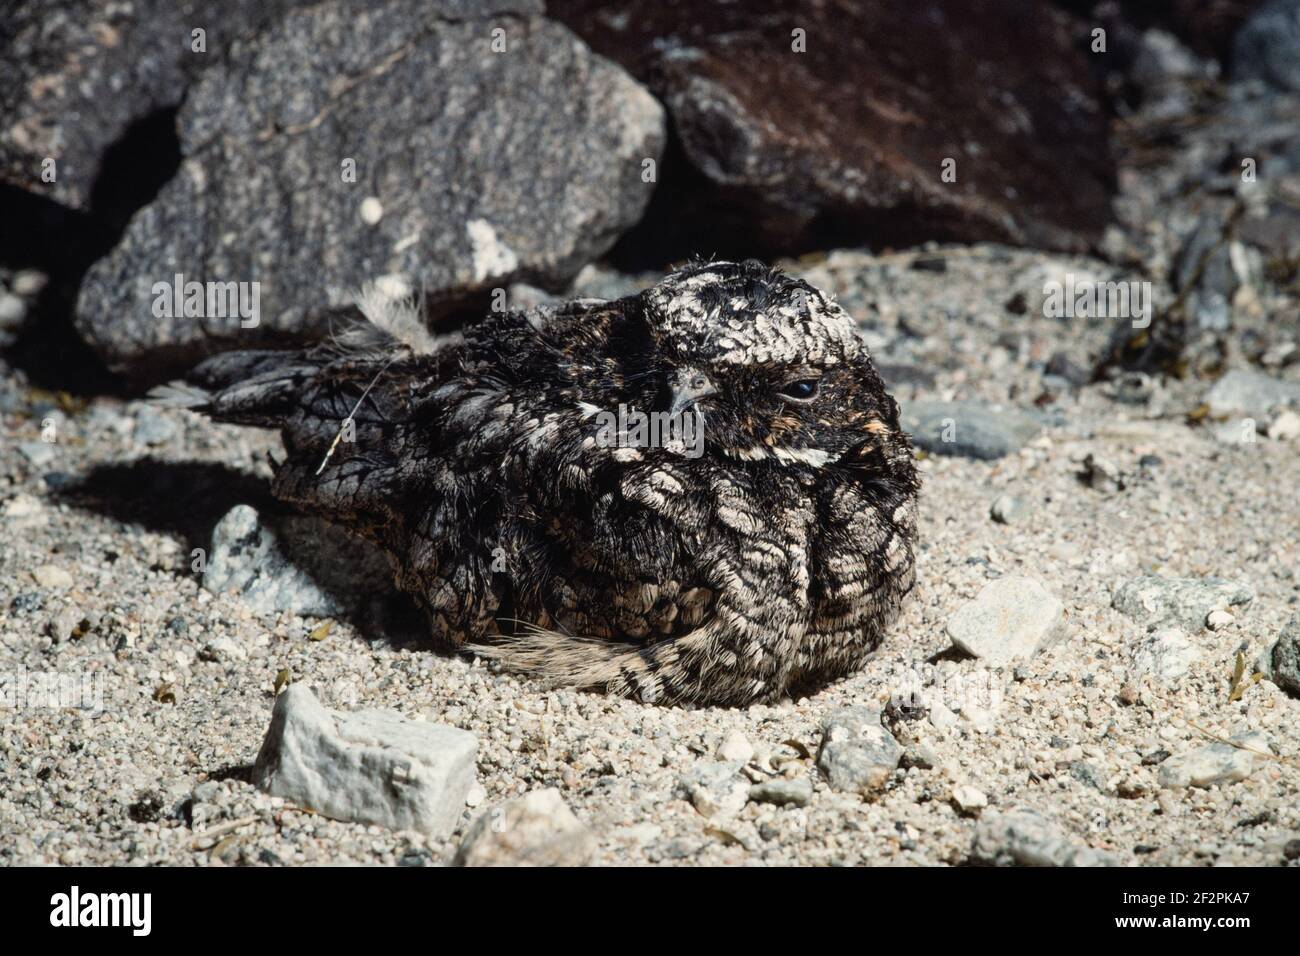 Common Poorwill, Phalaenoptilus nuttallii, is a nocturnal bird of the nightjar family and is native to the western U.S. and Canada as well as Mexico. Stock Photo